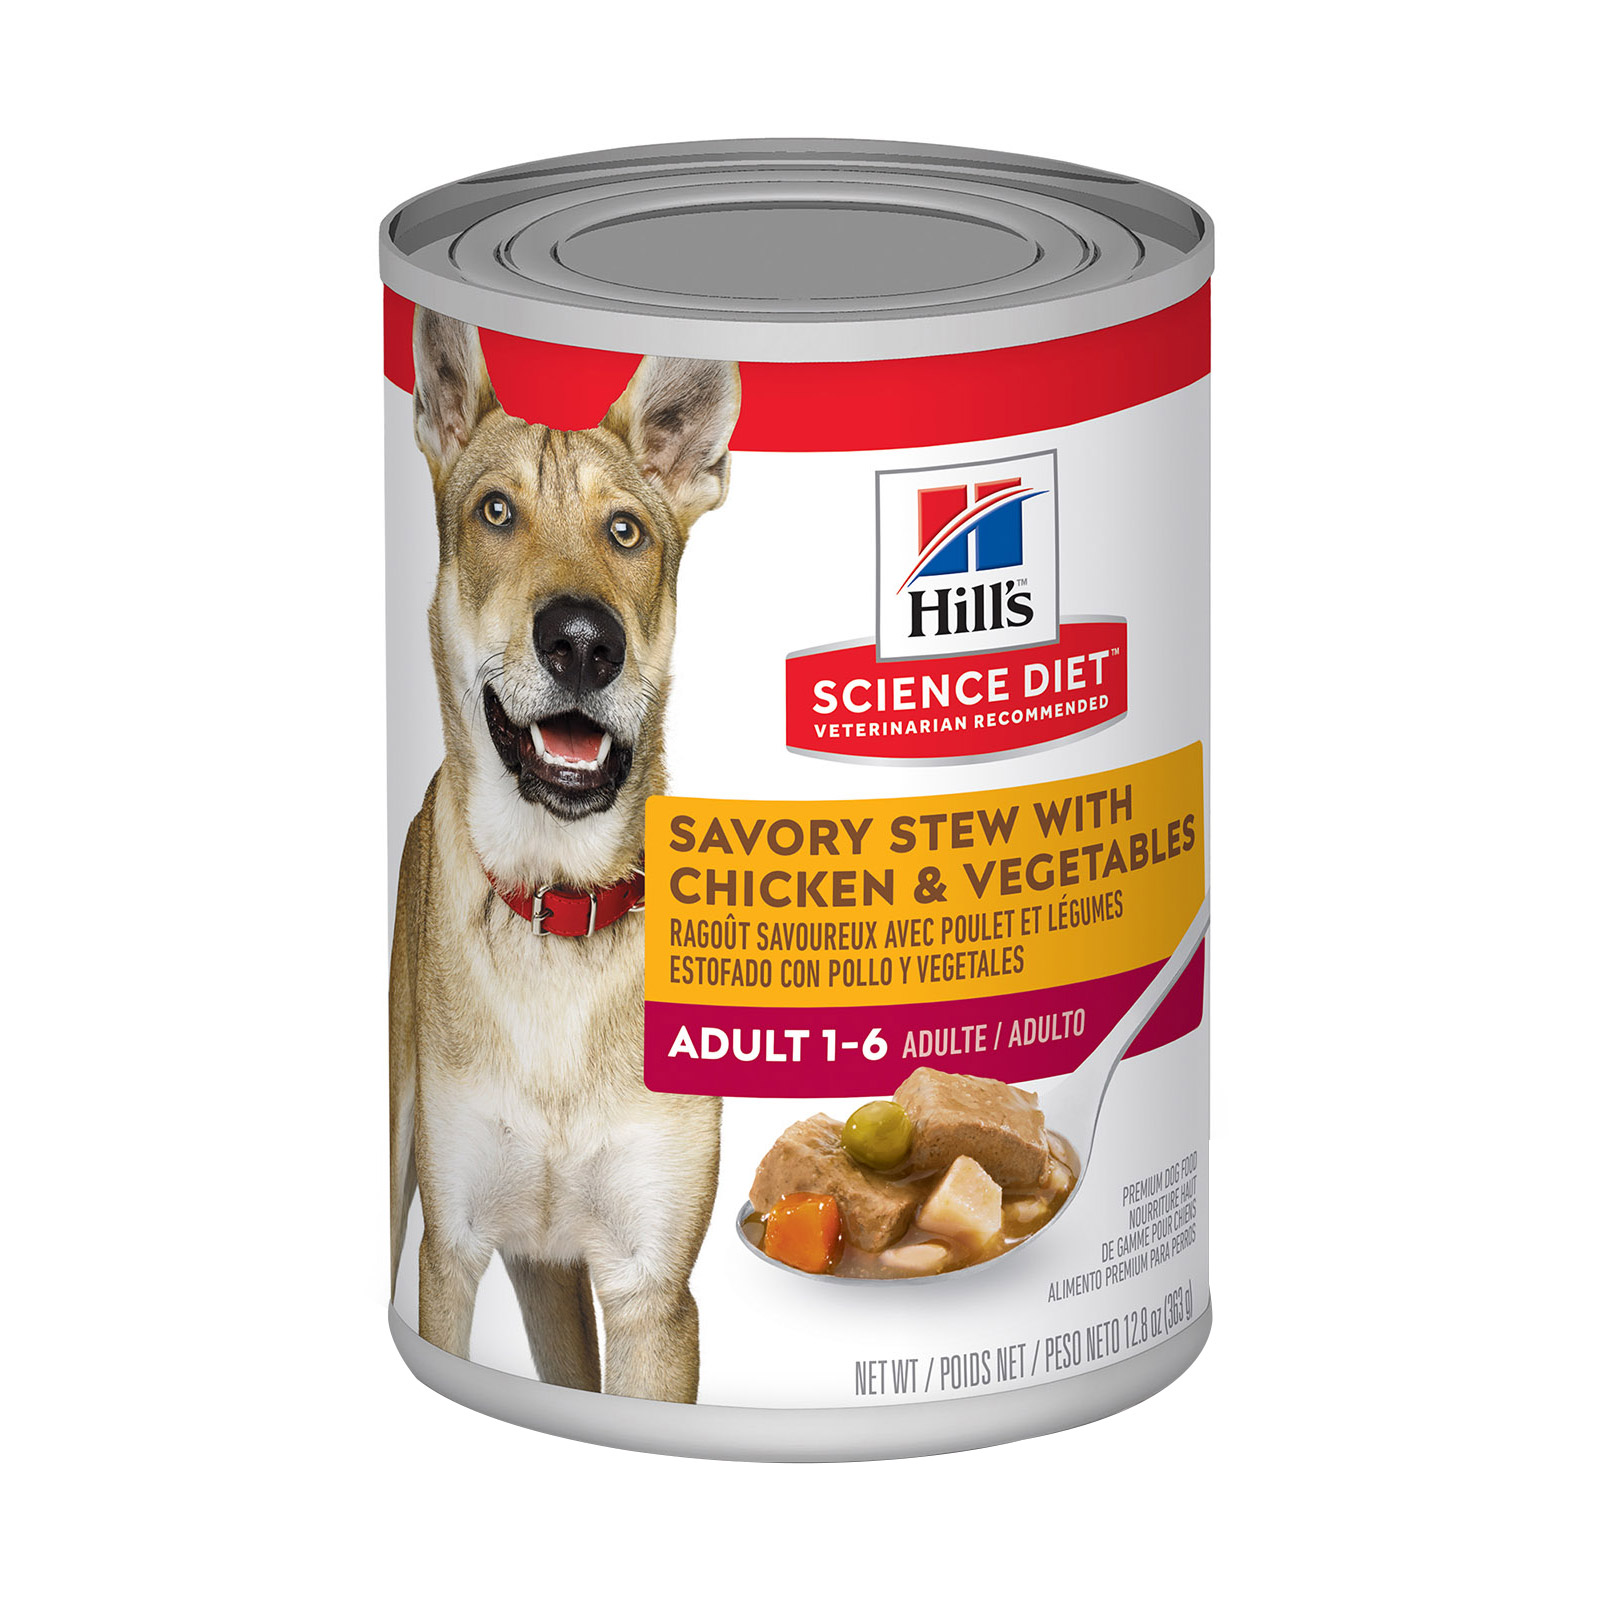 Hill's Science Diet Adult Savory Stew Chicken & Vegetable Canned Dog Food for Food